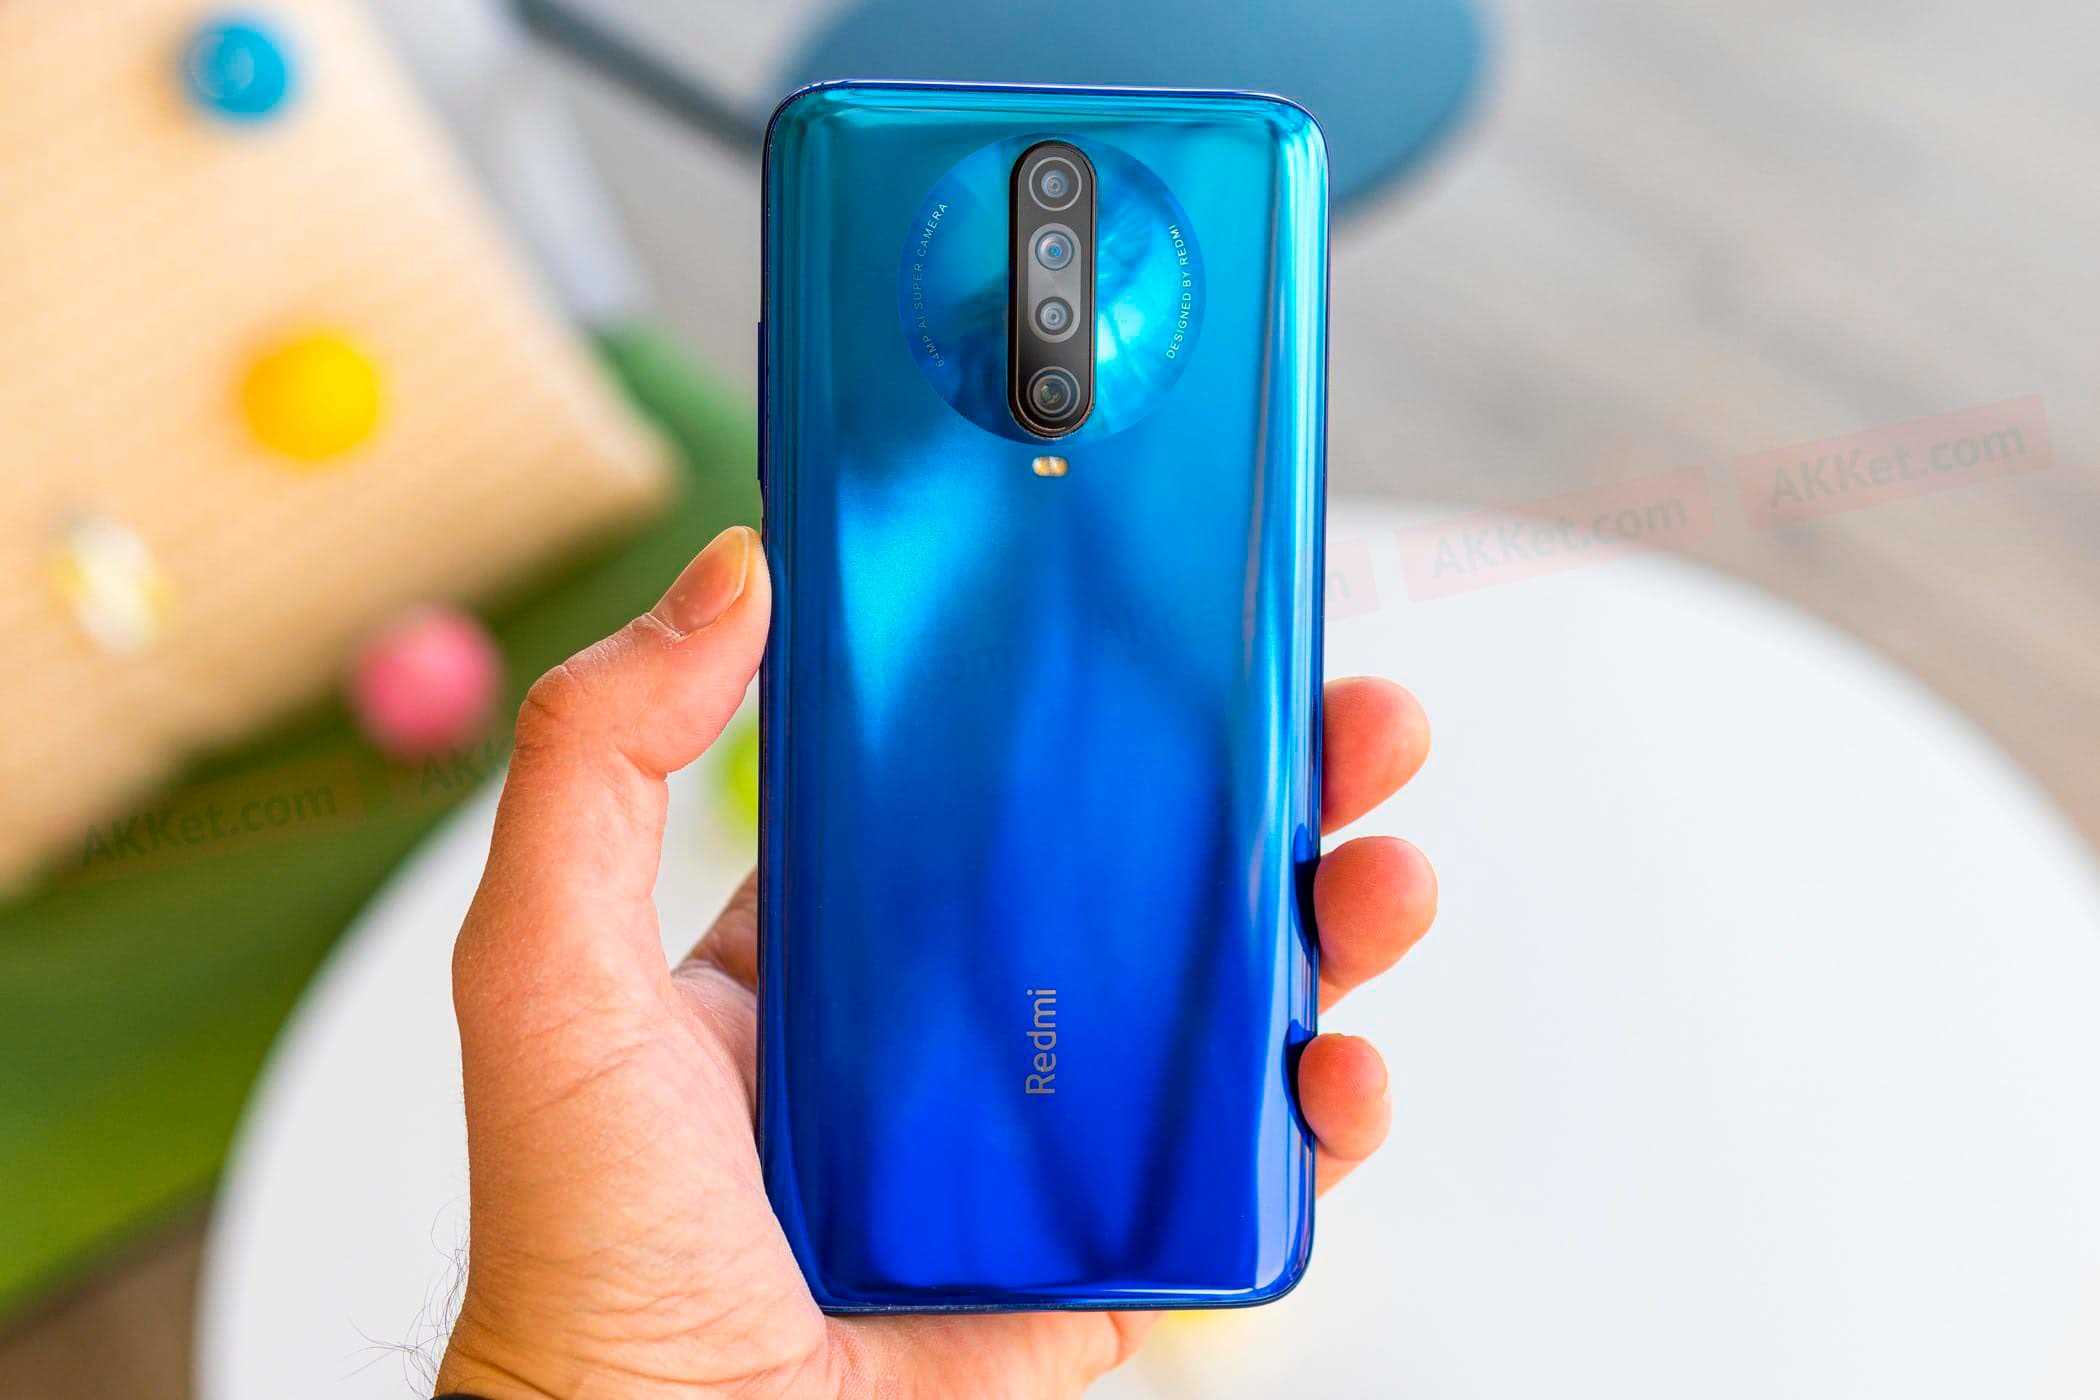 Review of the smartphone Xiaomi Redmi 9 with advantages and disadvantages